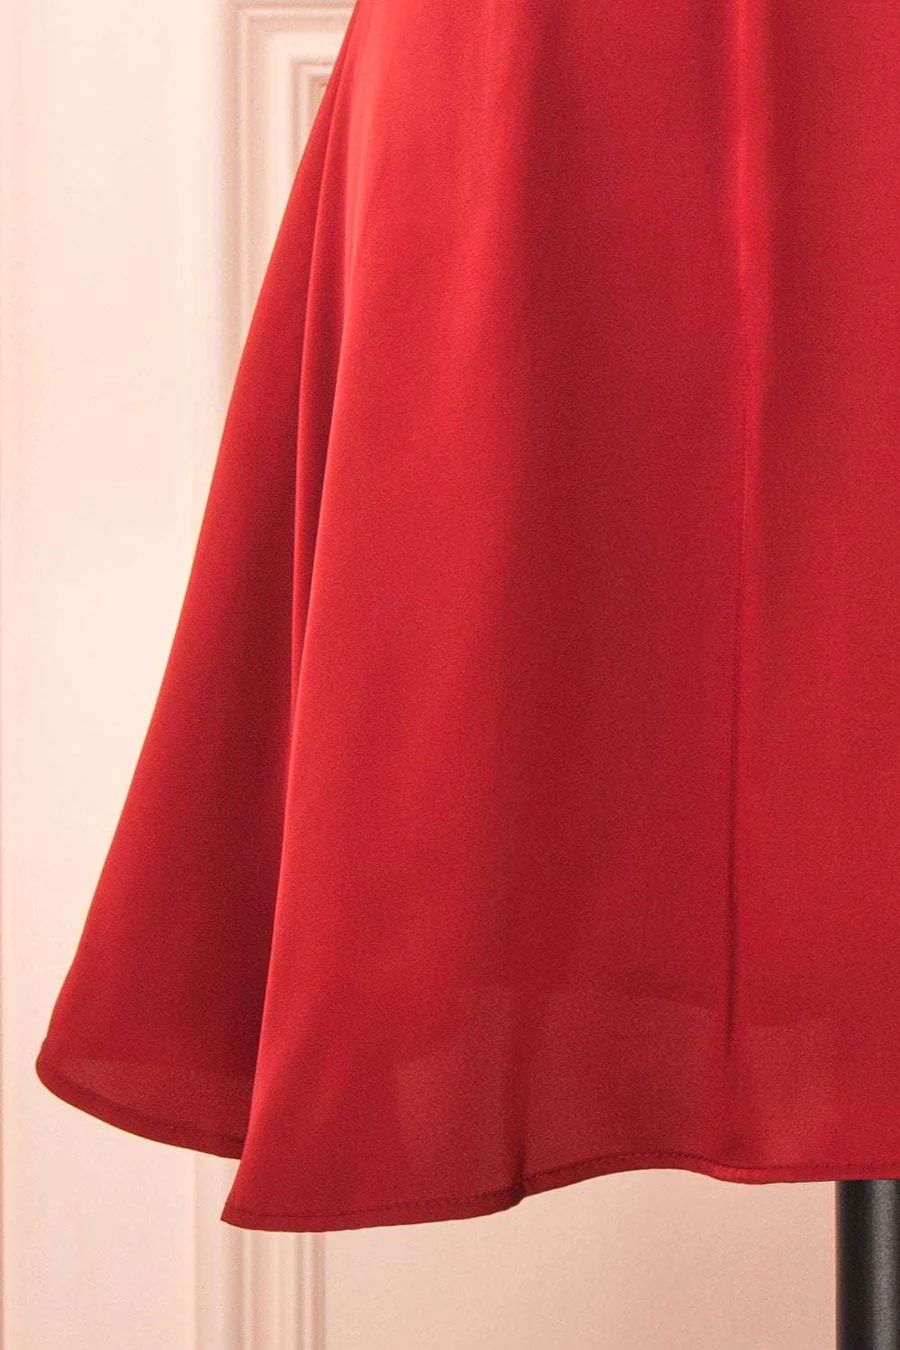 Classic Red Cow Neck Homecoming Dress Bridesmaid Dresses - DollyGown